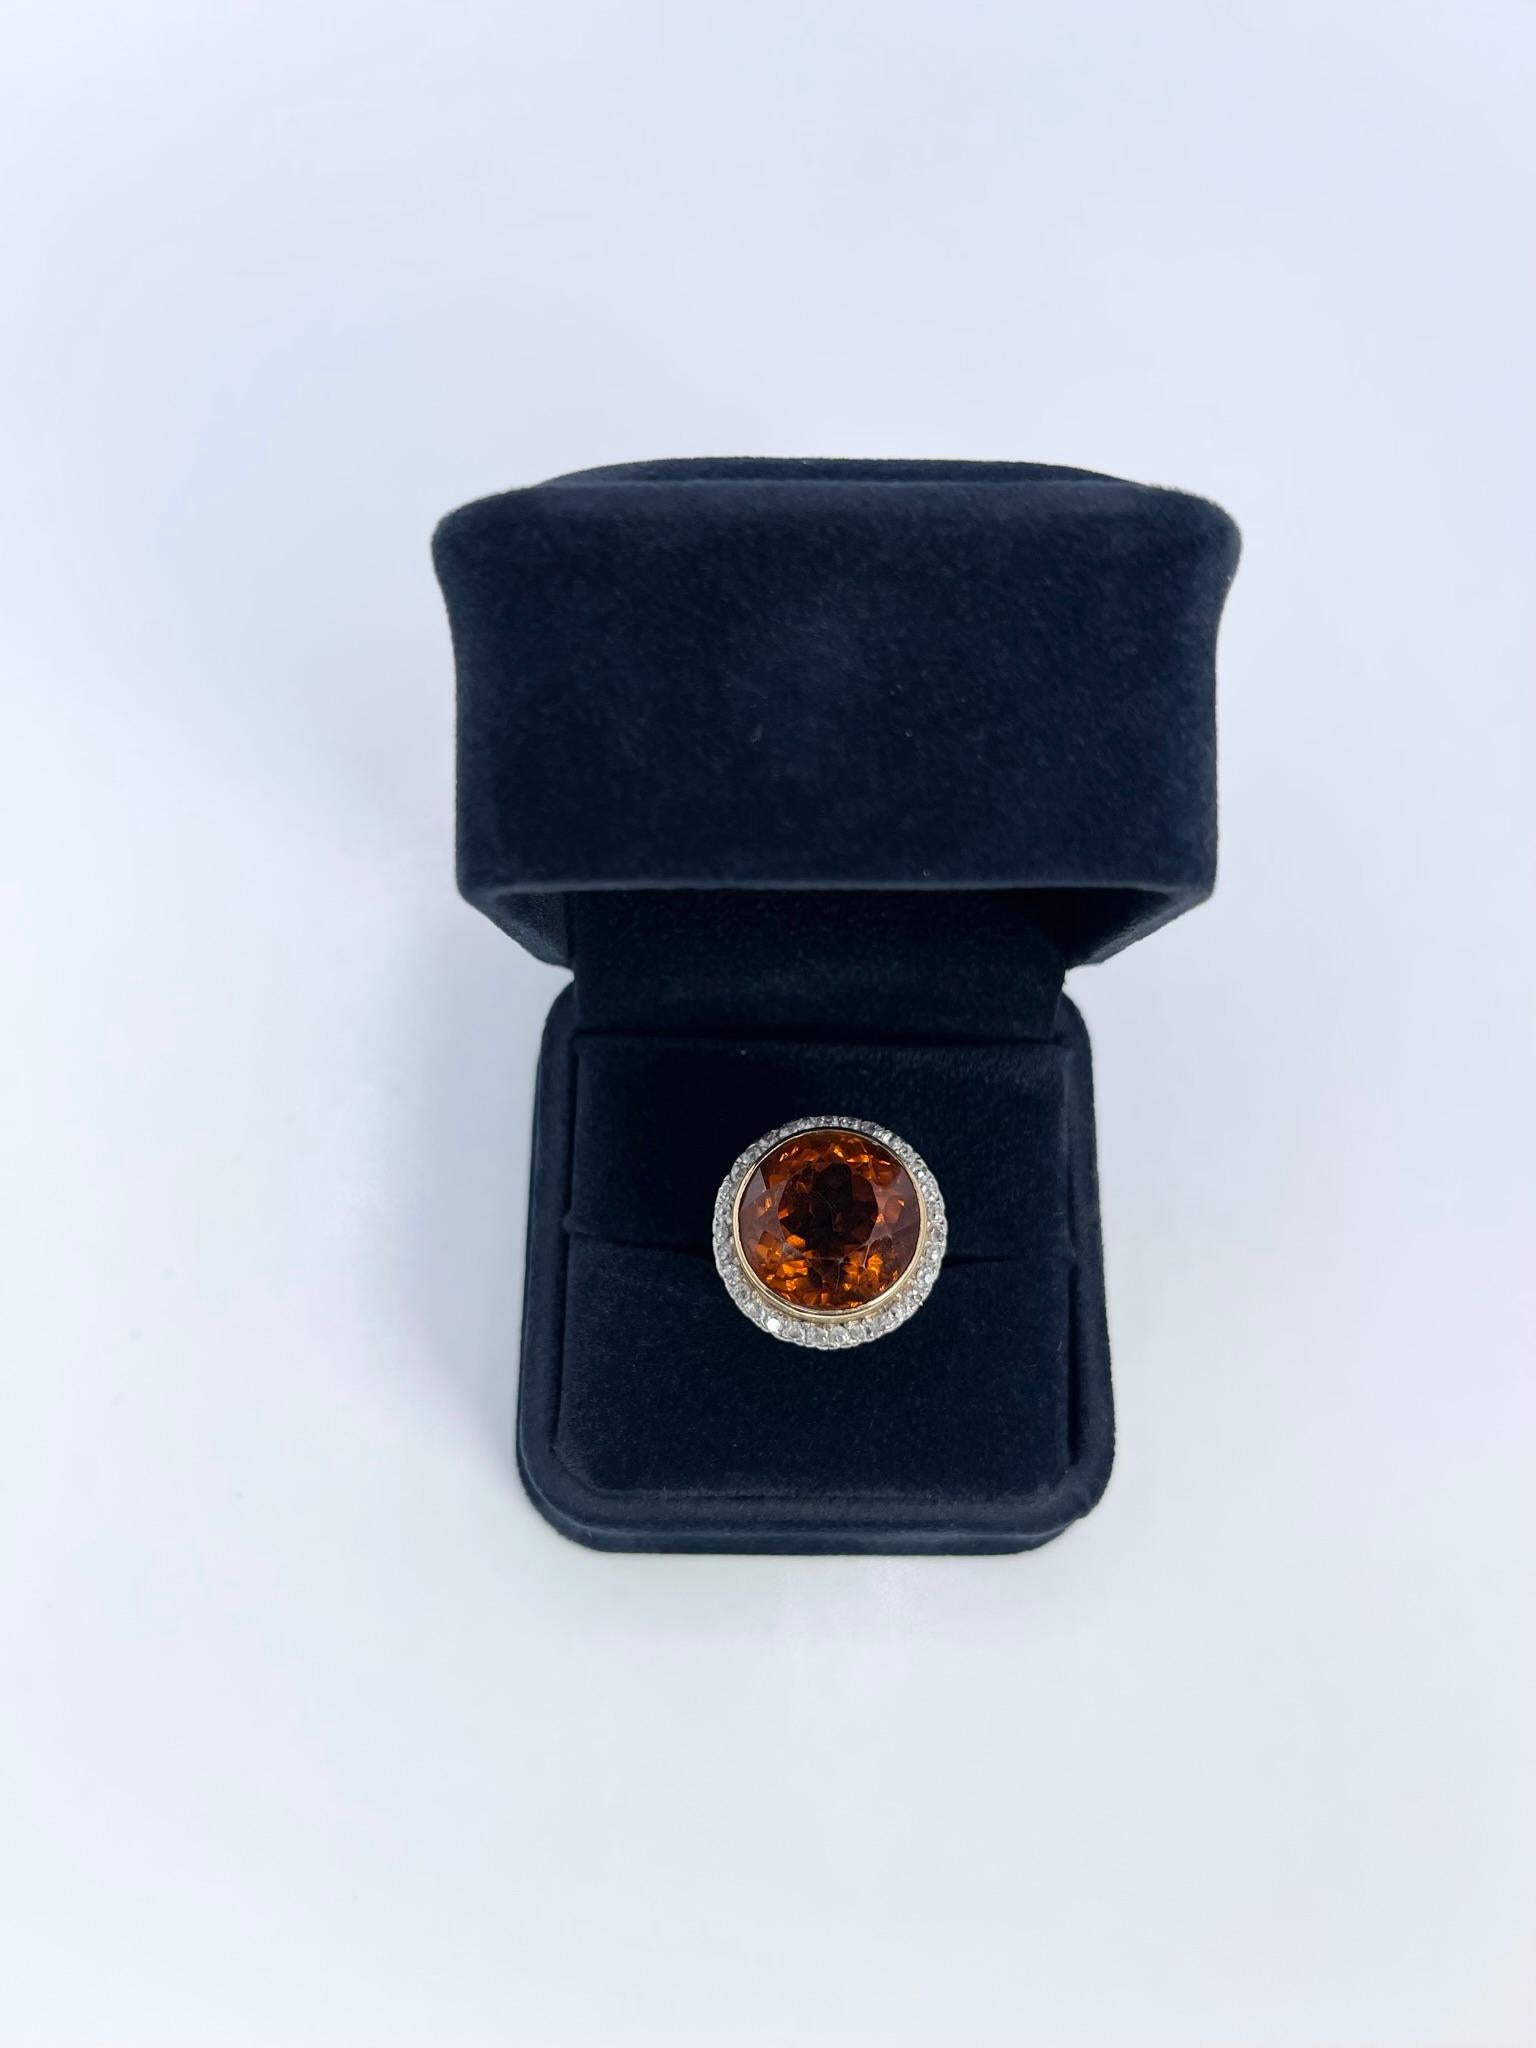 Rare imperial citrine diamond ring, the citrine is AAAA quality with cognac orange hues that are a rare find, the ring is a Victorian style made in 14KT yellow gold. 

GRAM WEIGHT: 11.54gr
GOLD: 14KT yellow gold
NATURAL CITRINE
Count: 1 (15mm)
Cut: